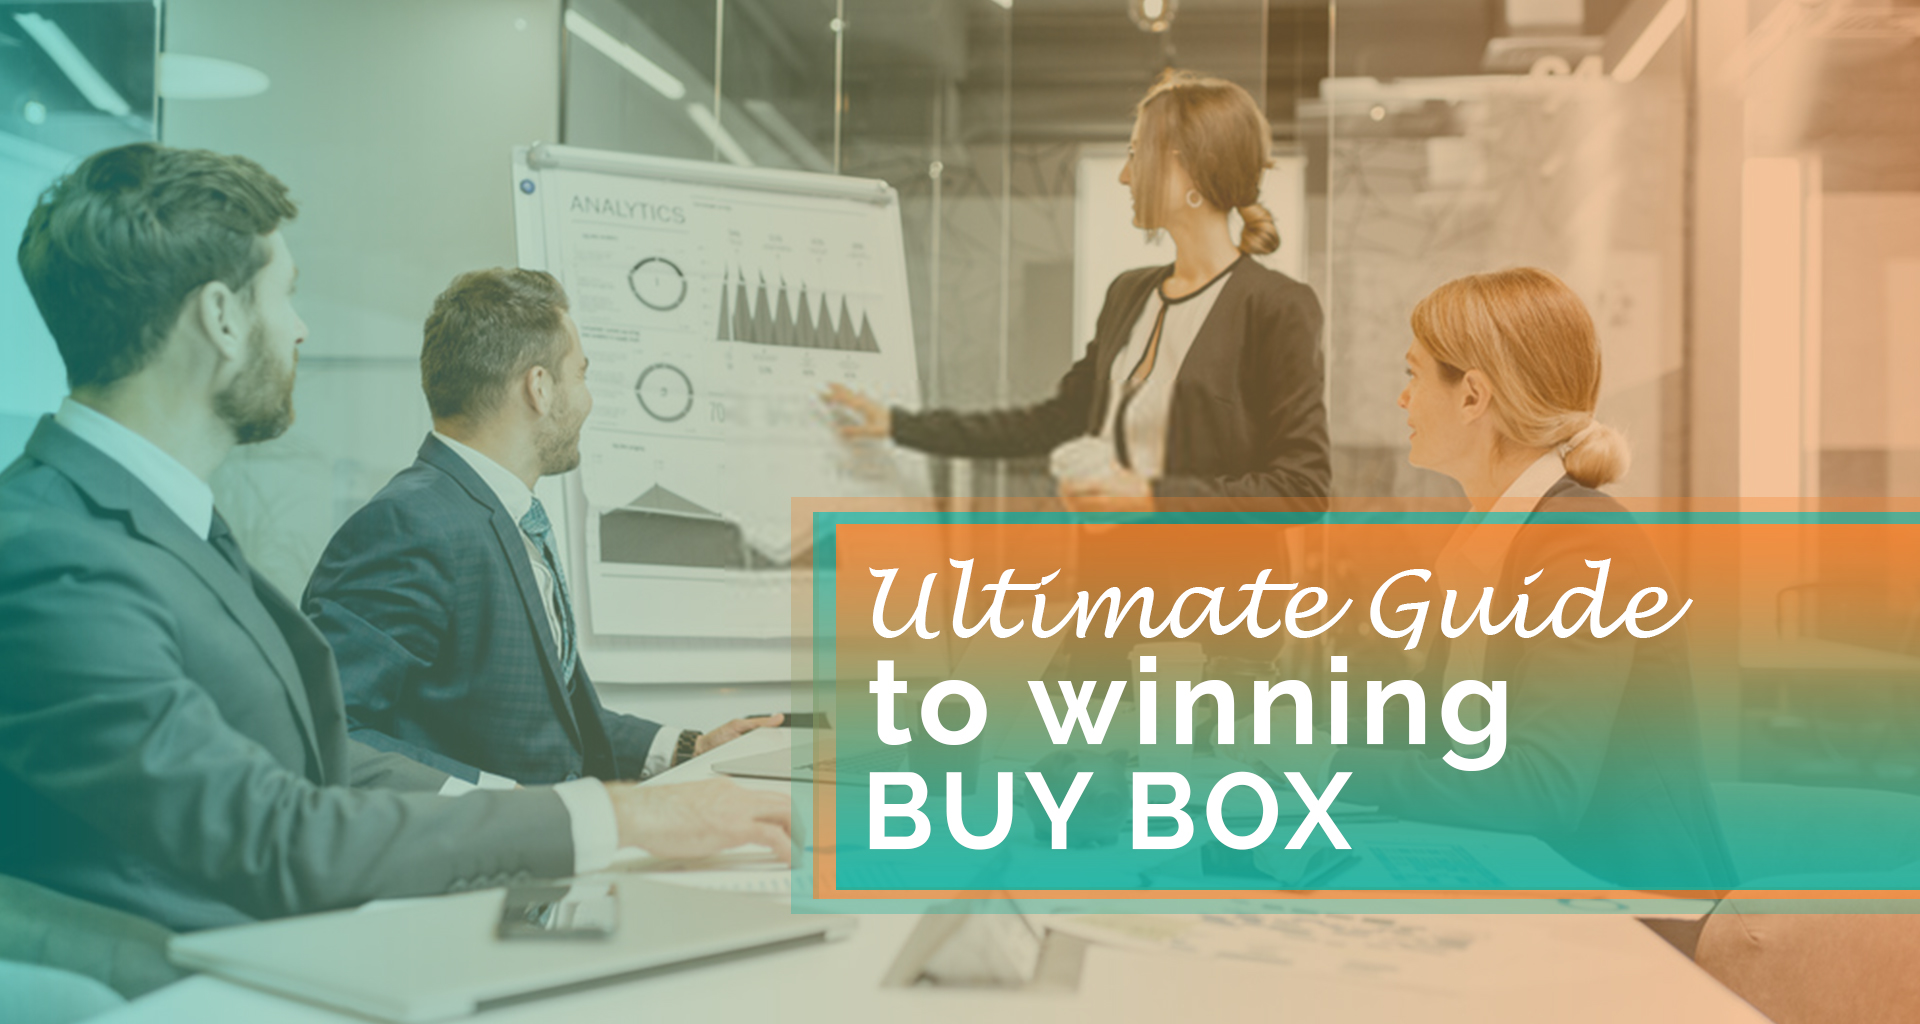 5 Points Guide to Amazon Buy Box in 2019